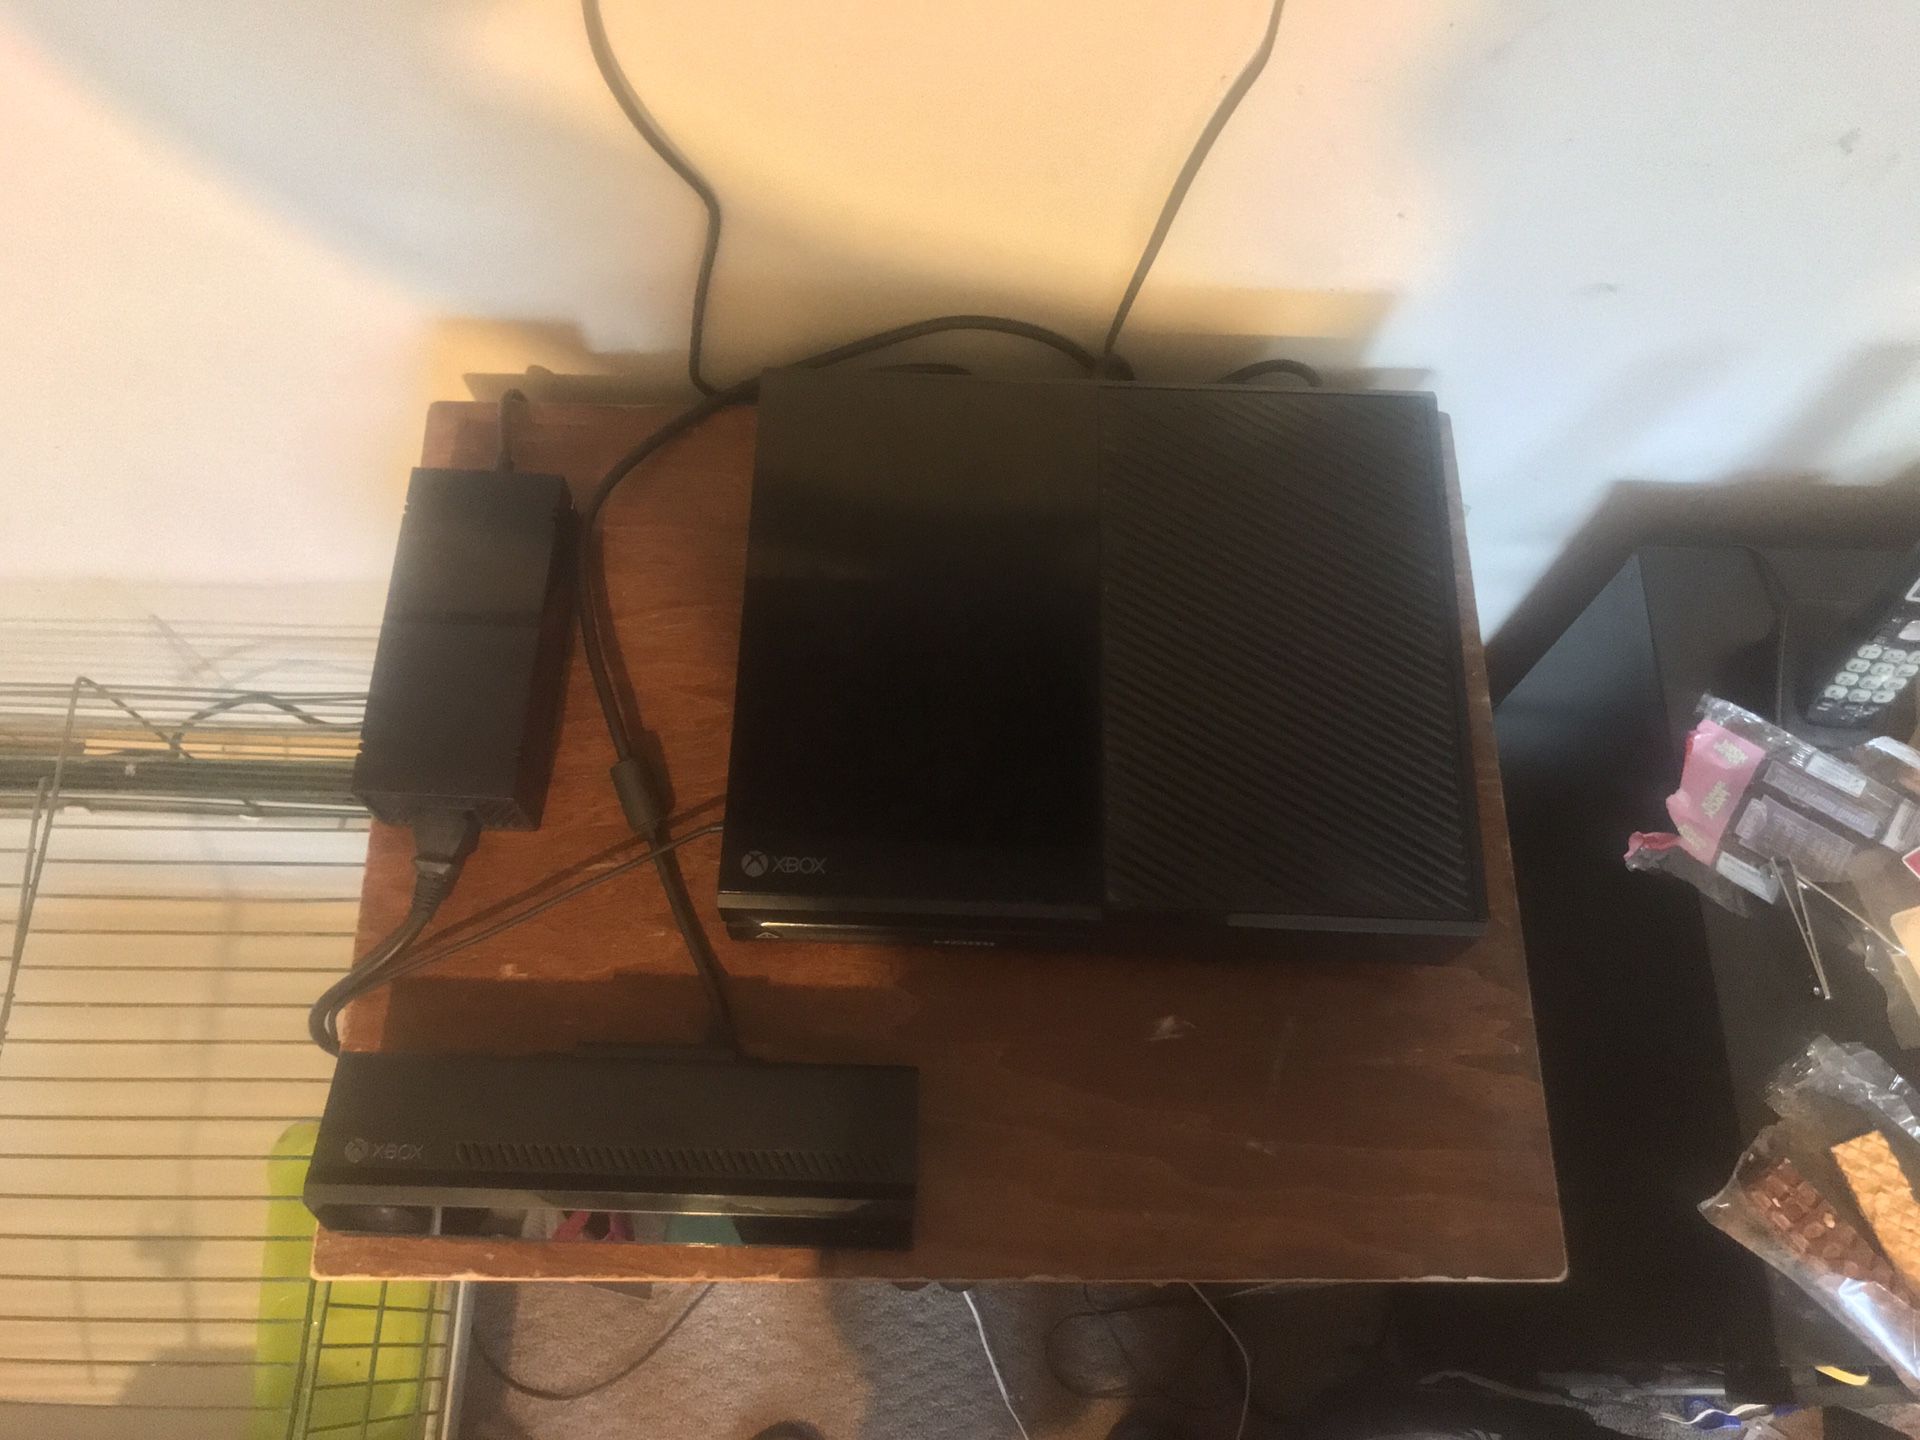 Xbox One 500 GB with Kinect